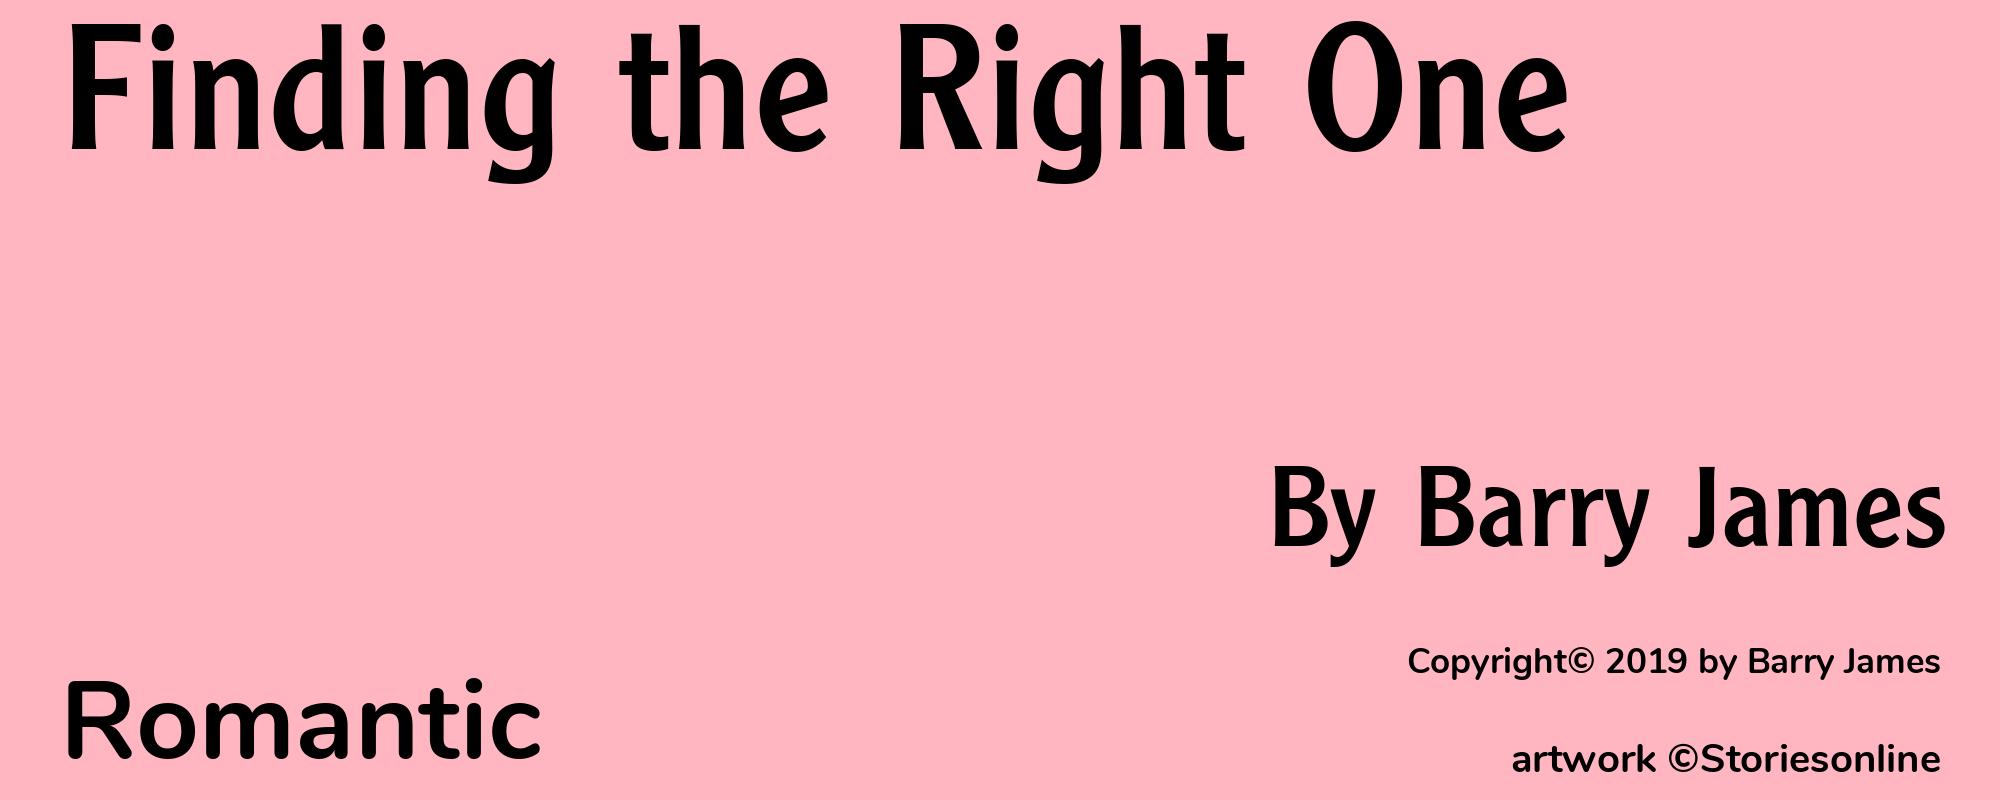 Finding the Right One - Cover